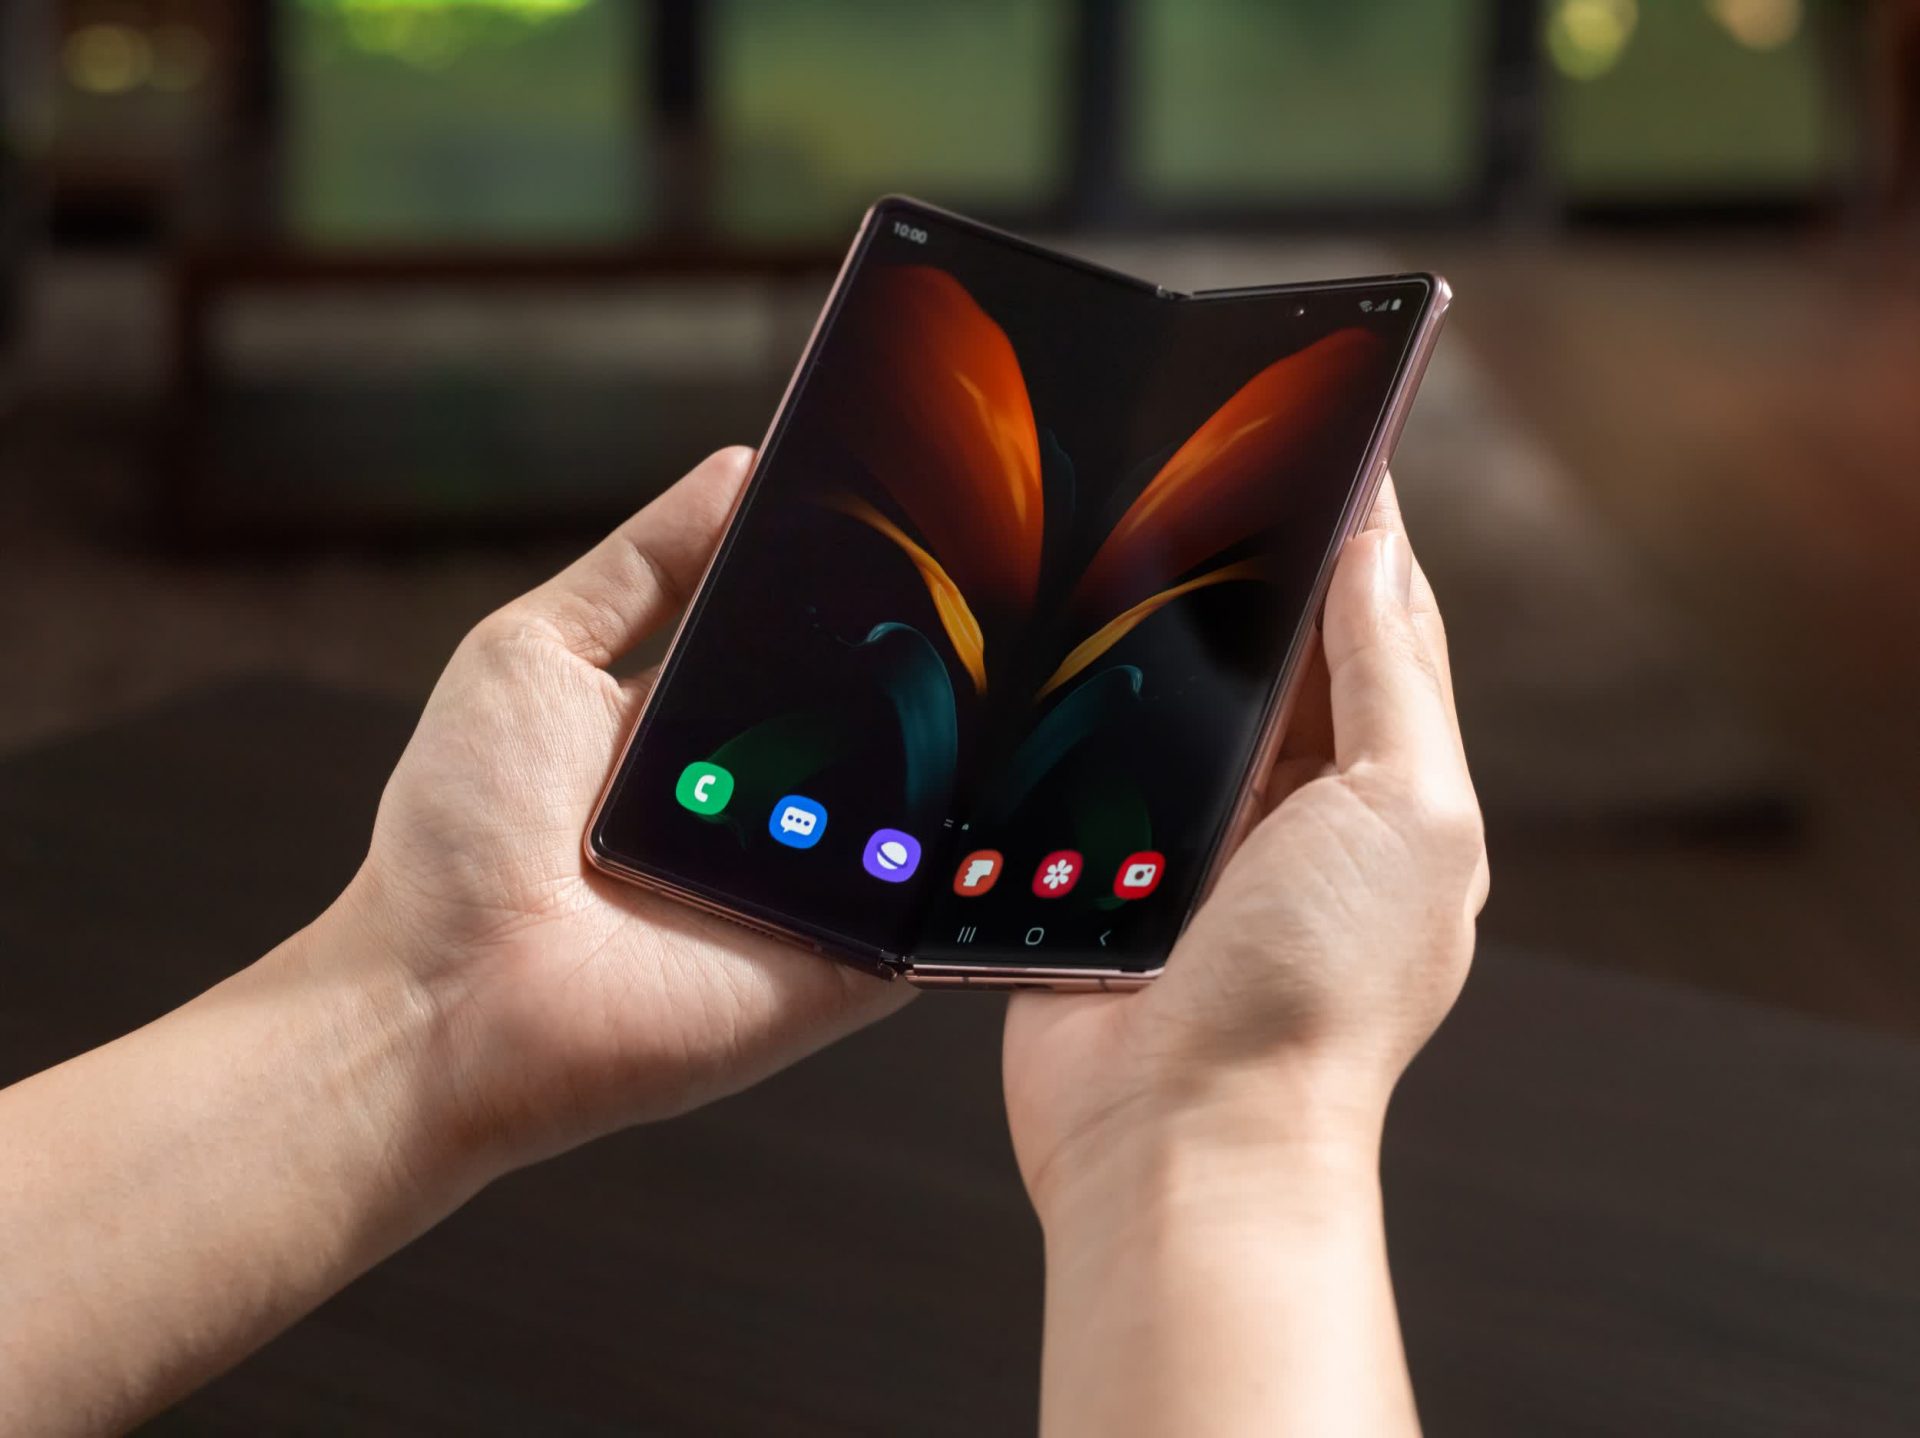 Samsung’s Galaxy Z Fold 2 cloak can serene be scratched along with your fingernail